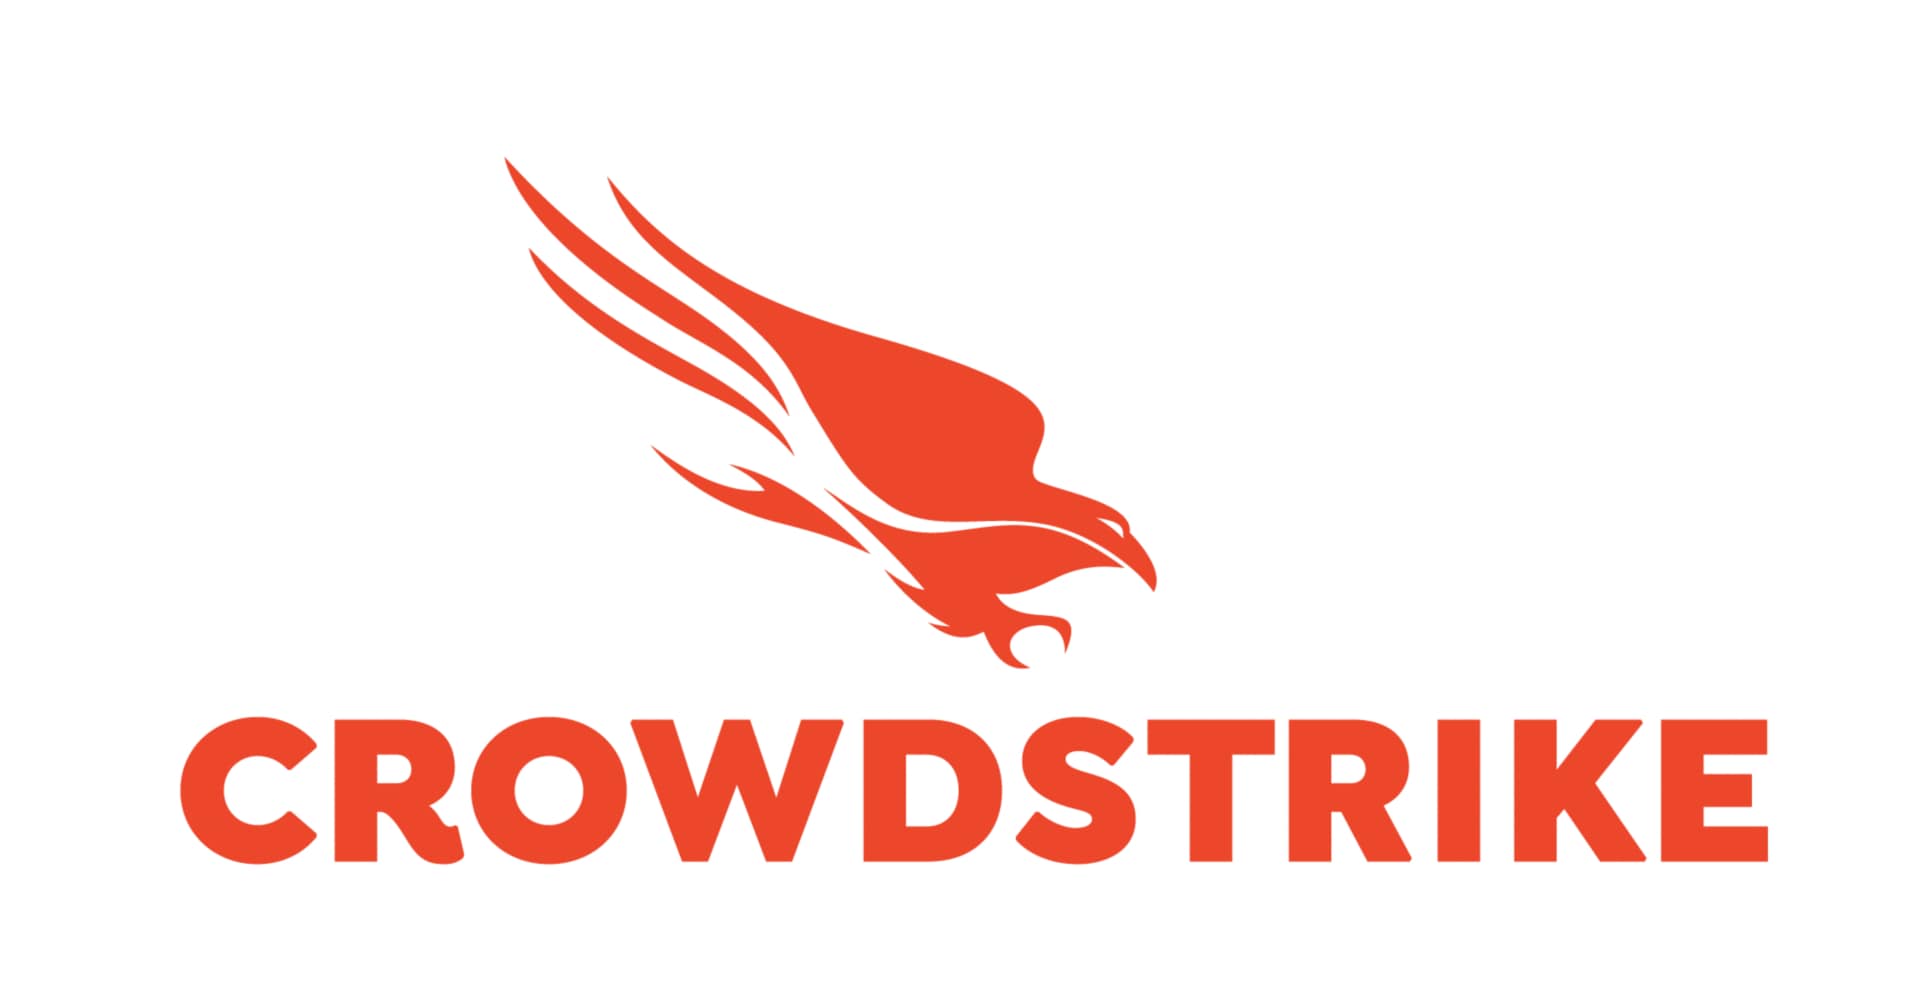 CrowdStrike 22-Month Falcon Insight (EDR) Application Software Subscription (300-499 Licenses)